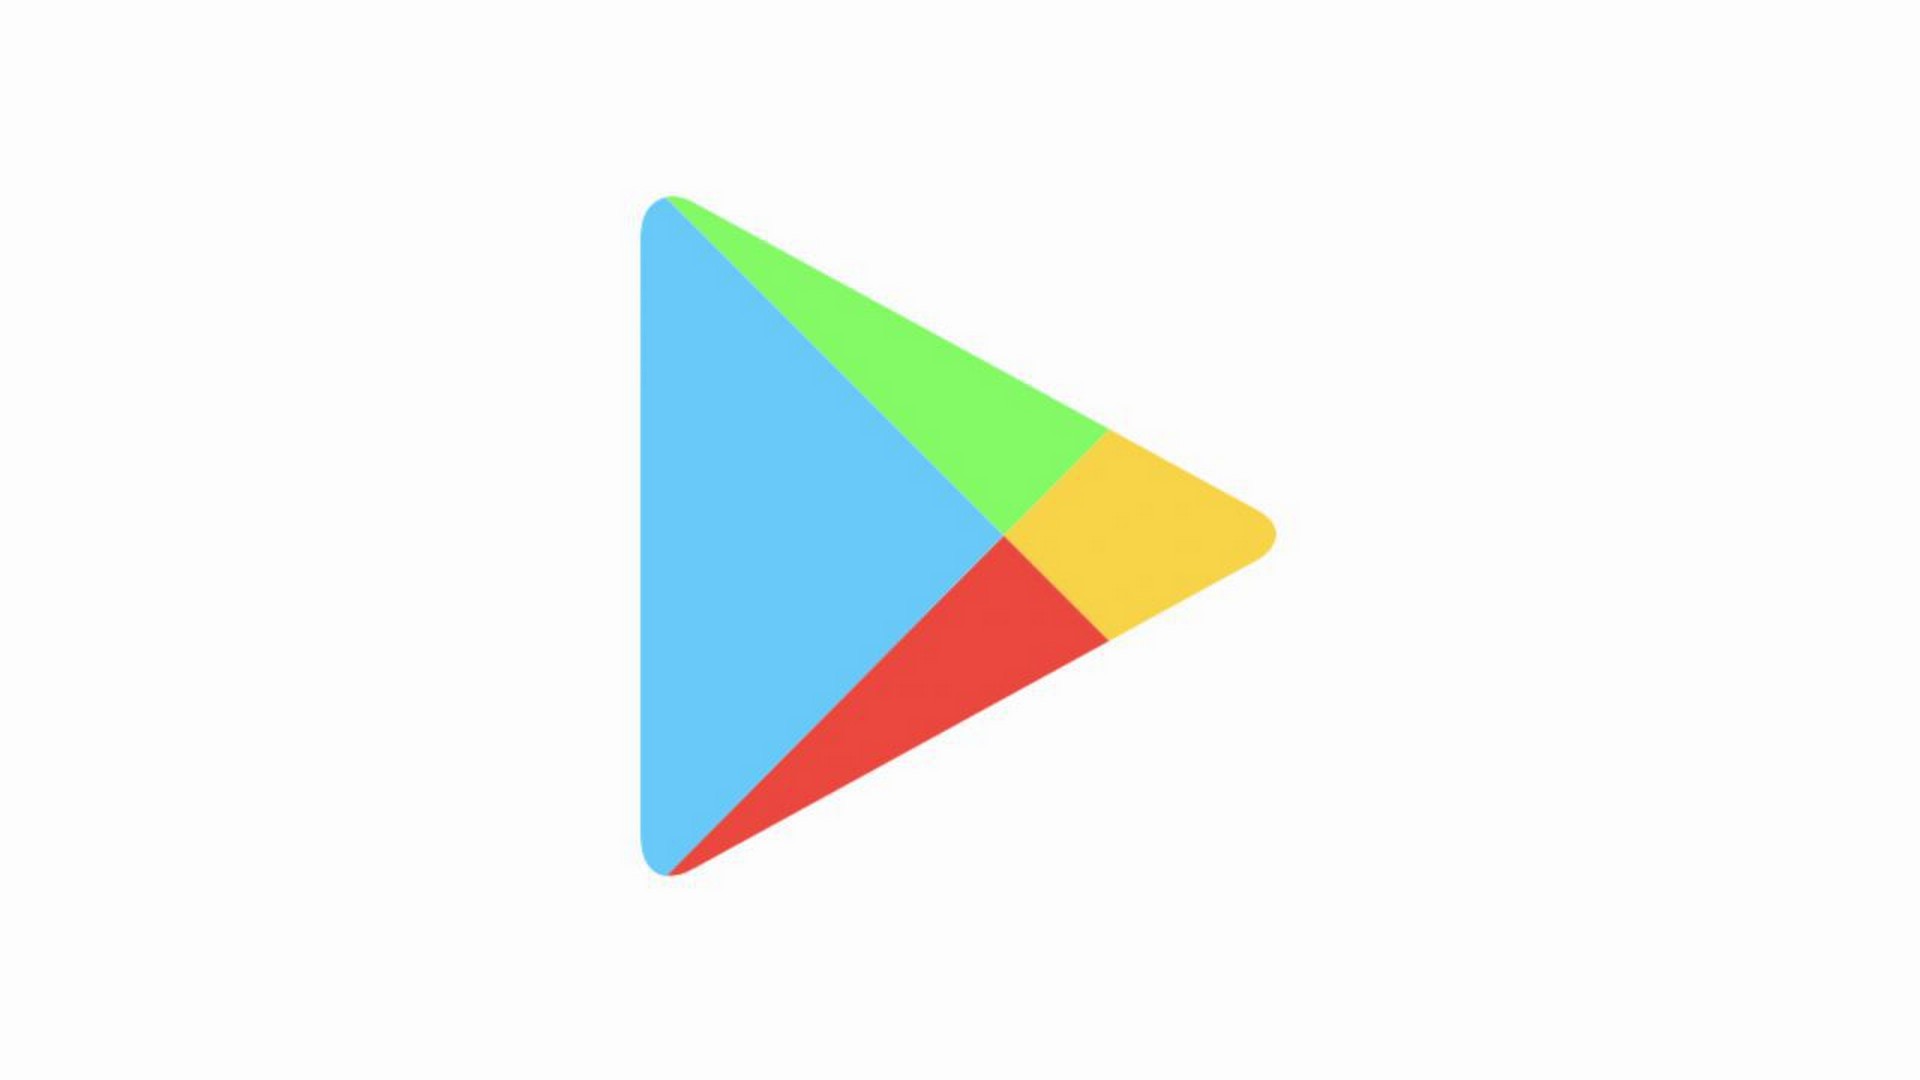 zfc application on play store download